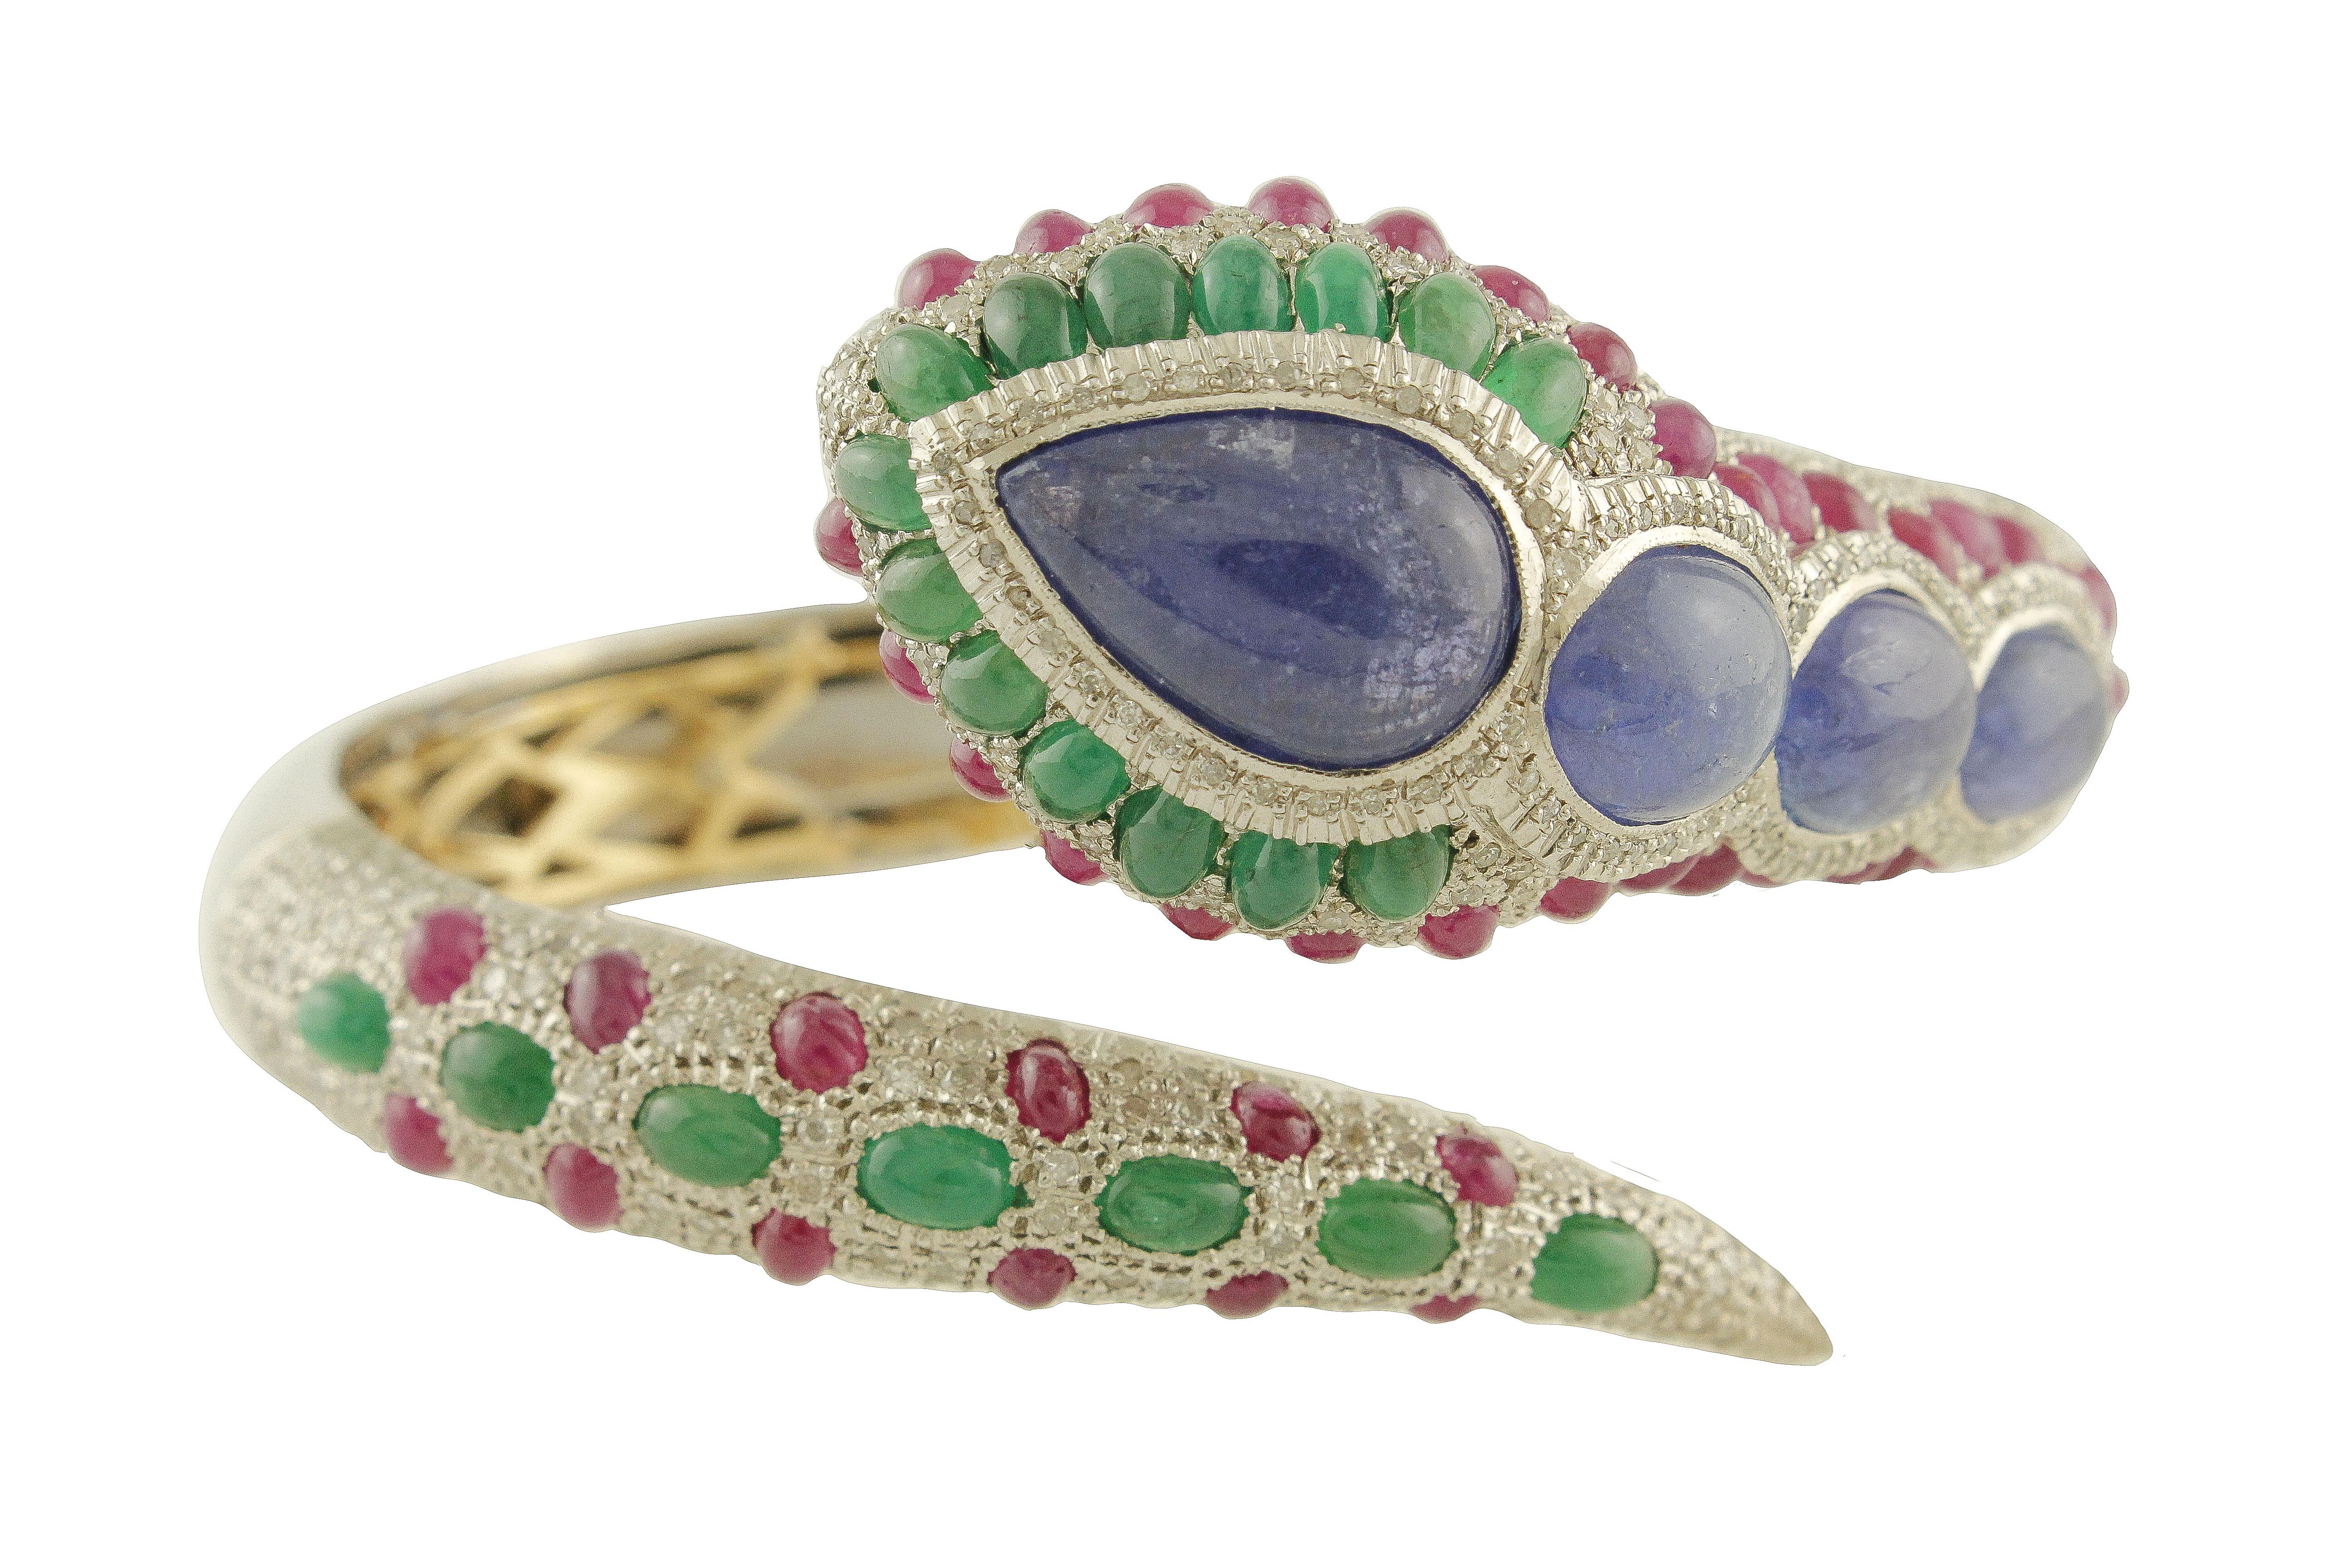 Elegant snake shape bracelet in 9K rose and white gold and silver structure mounted with 3 oval shape tanzanite on the neck and one tanzanite drop (1.6 cm X 1 cm) on the head, aroud it there is emeralds row and an other ruby row that finish on the